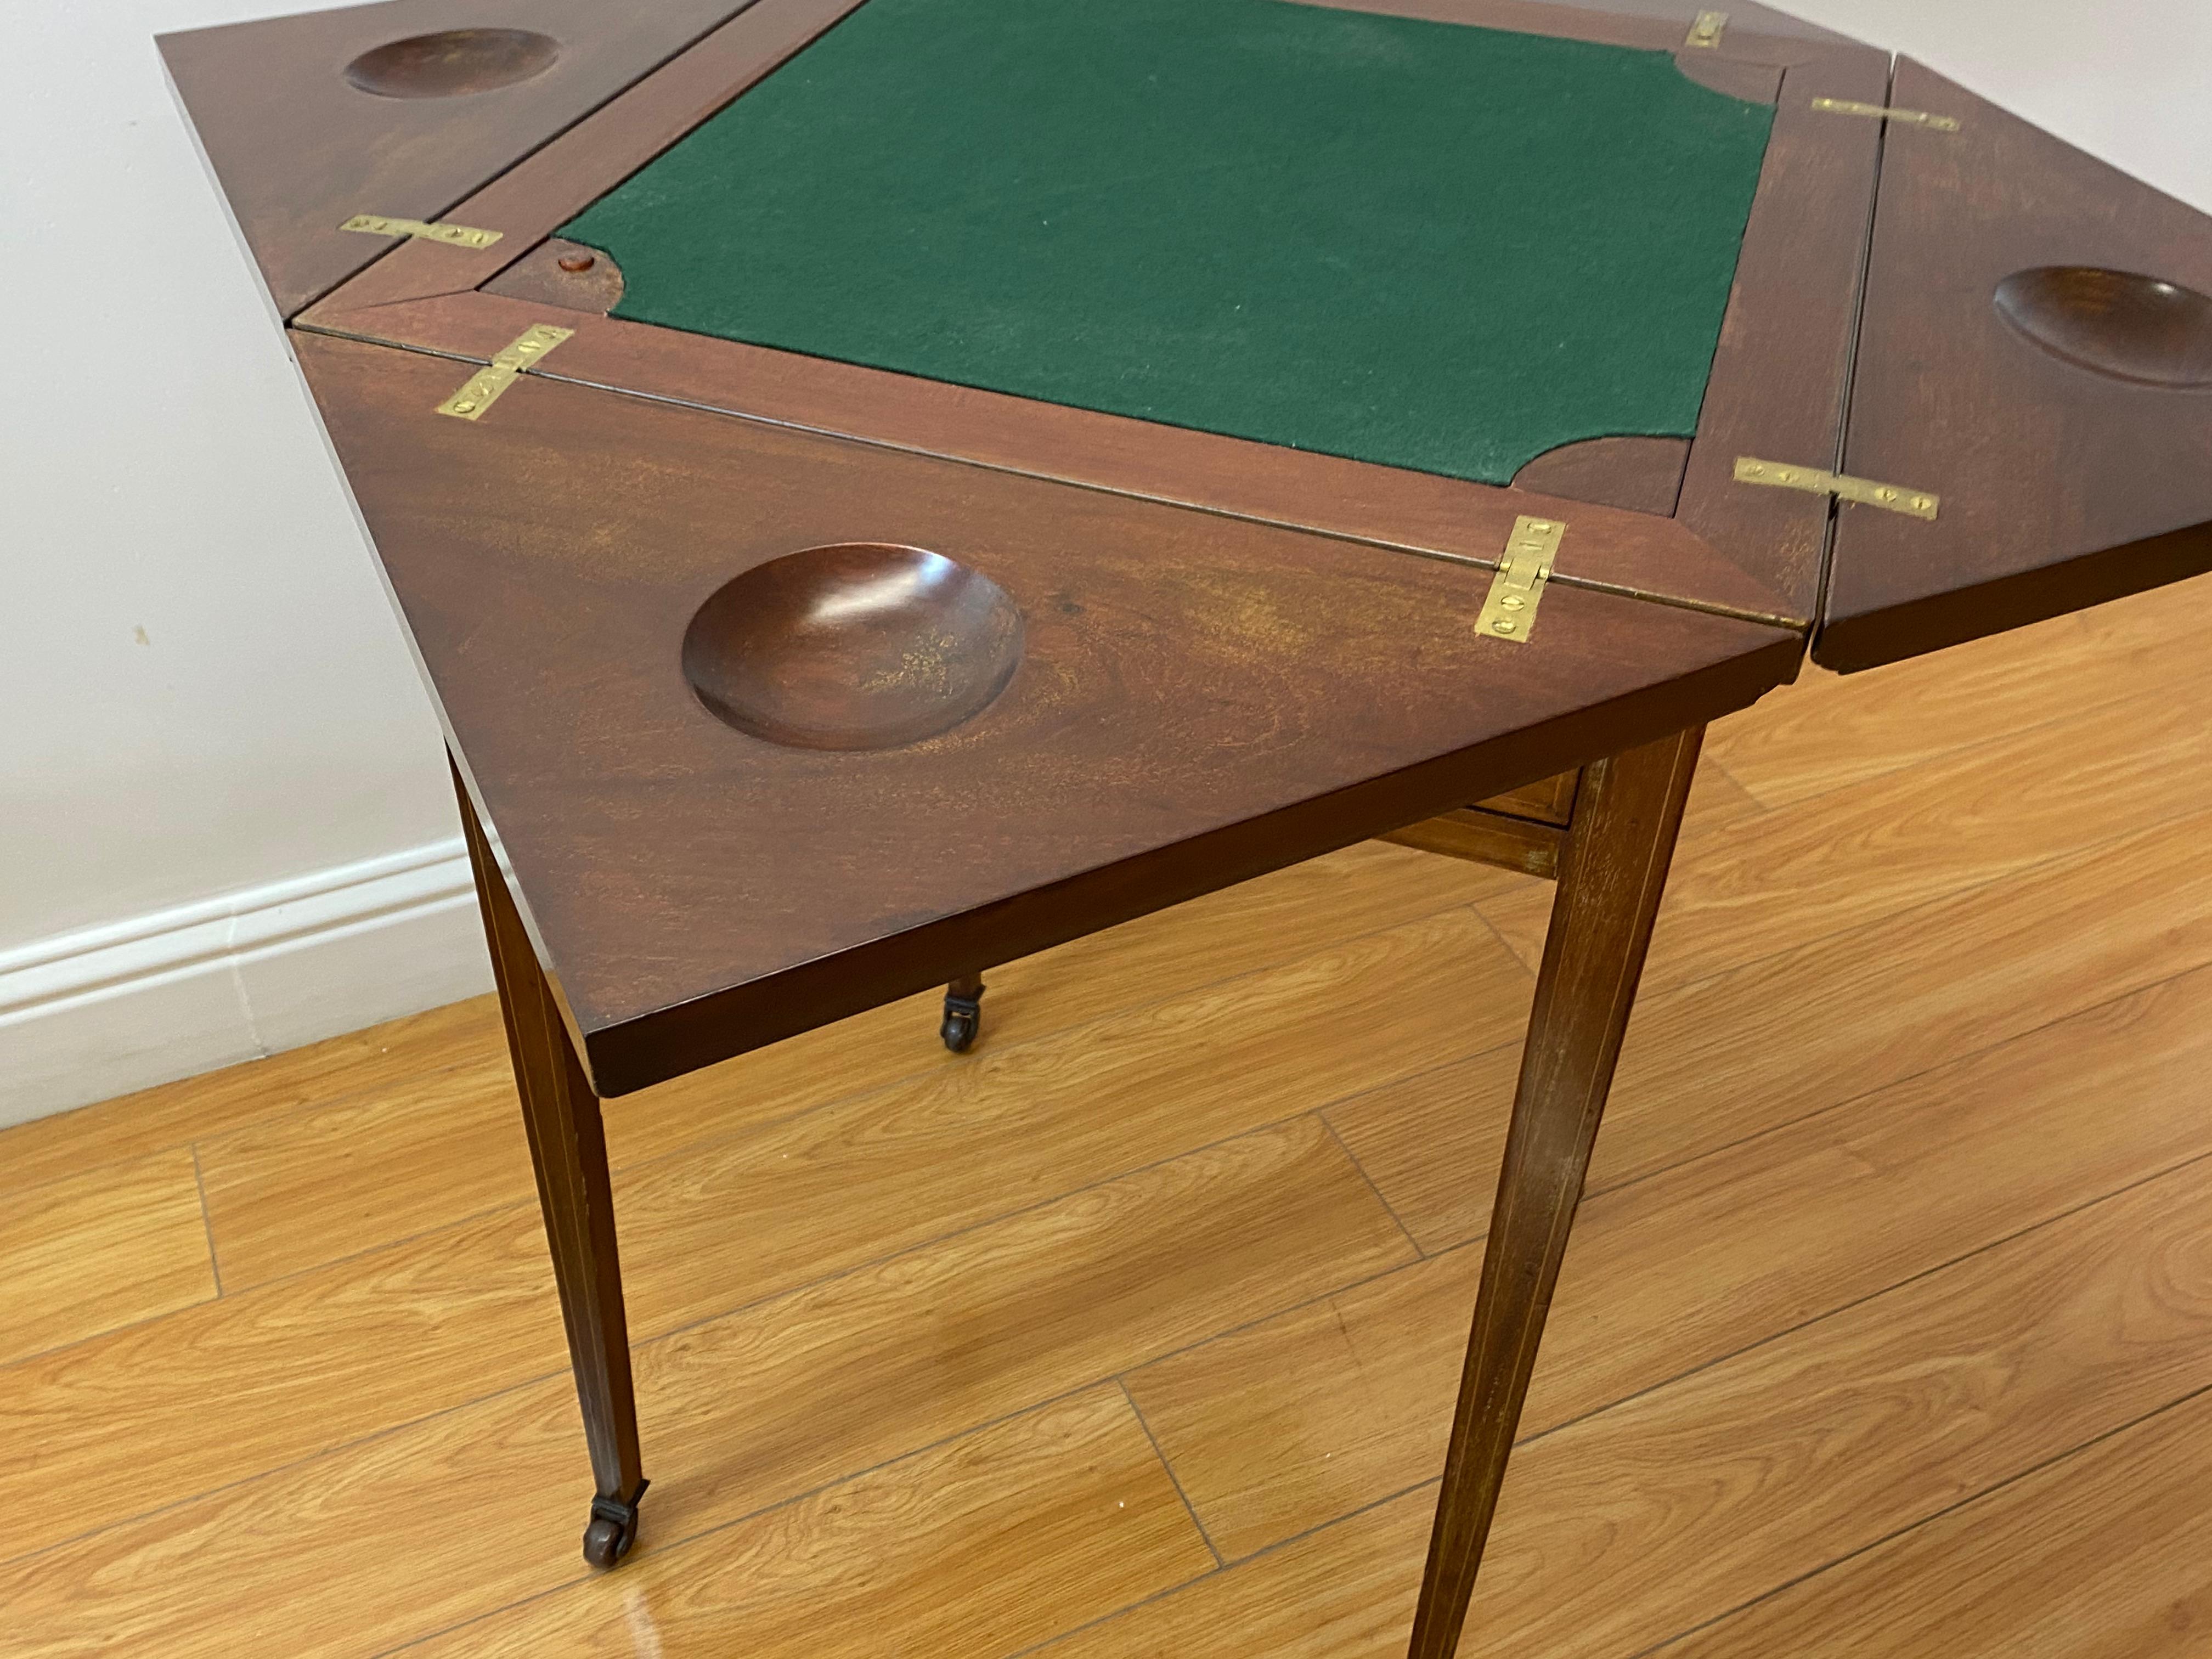 Vintage Inlaid Mahogany Handkerchief Folding Games / Side Table, C.1940 For Sale 1